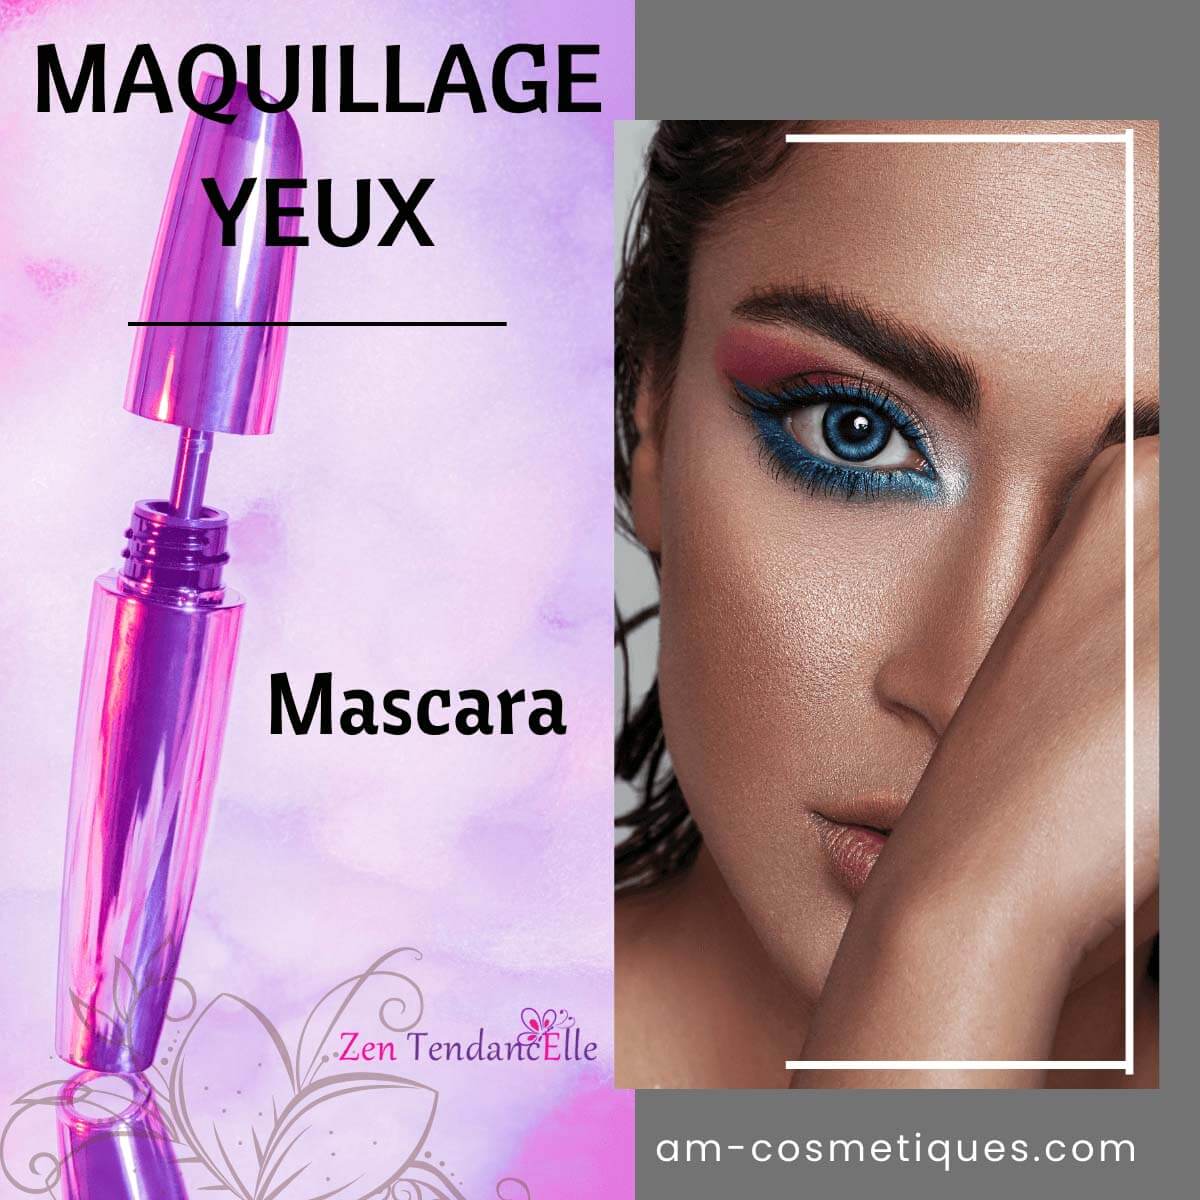 Mascara_pas_cher_maquillage_yeux_makeup_AM-Cosmetiques.jpg